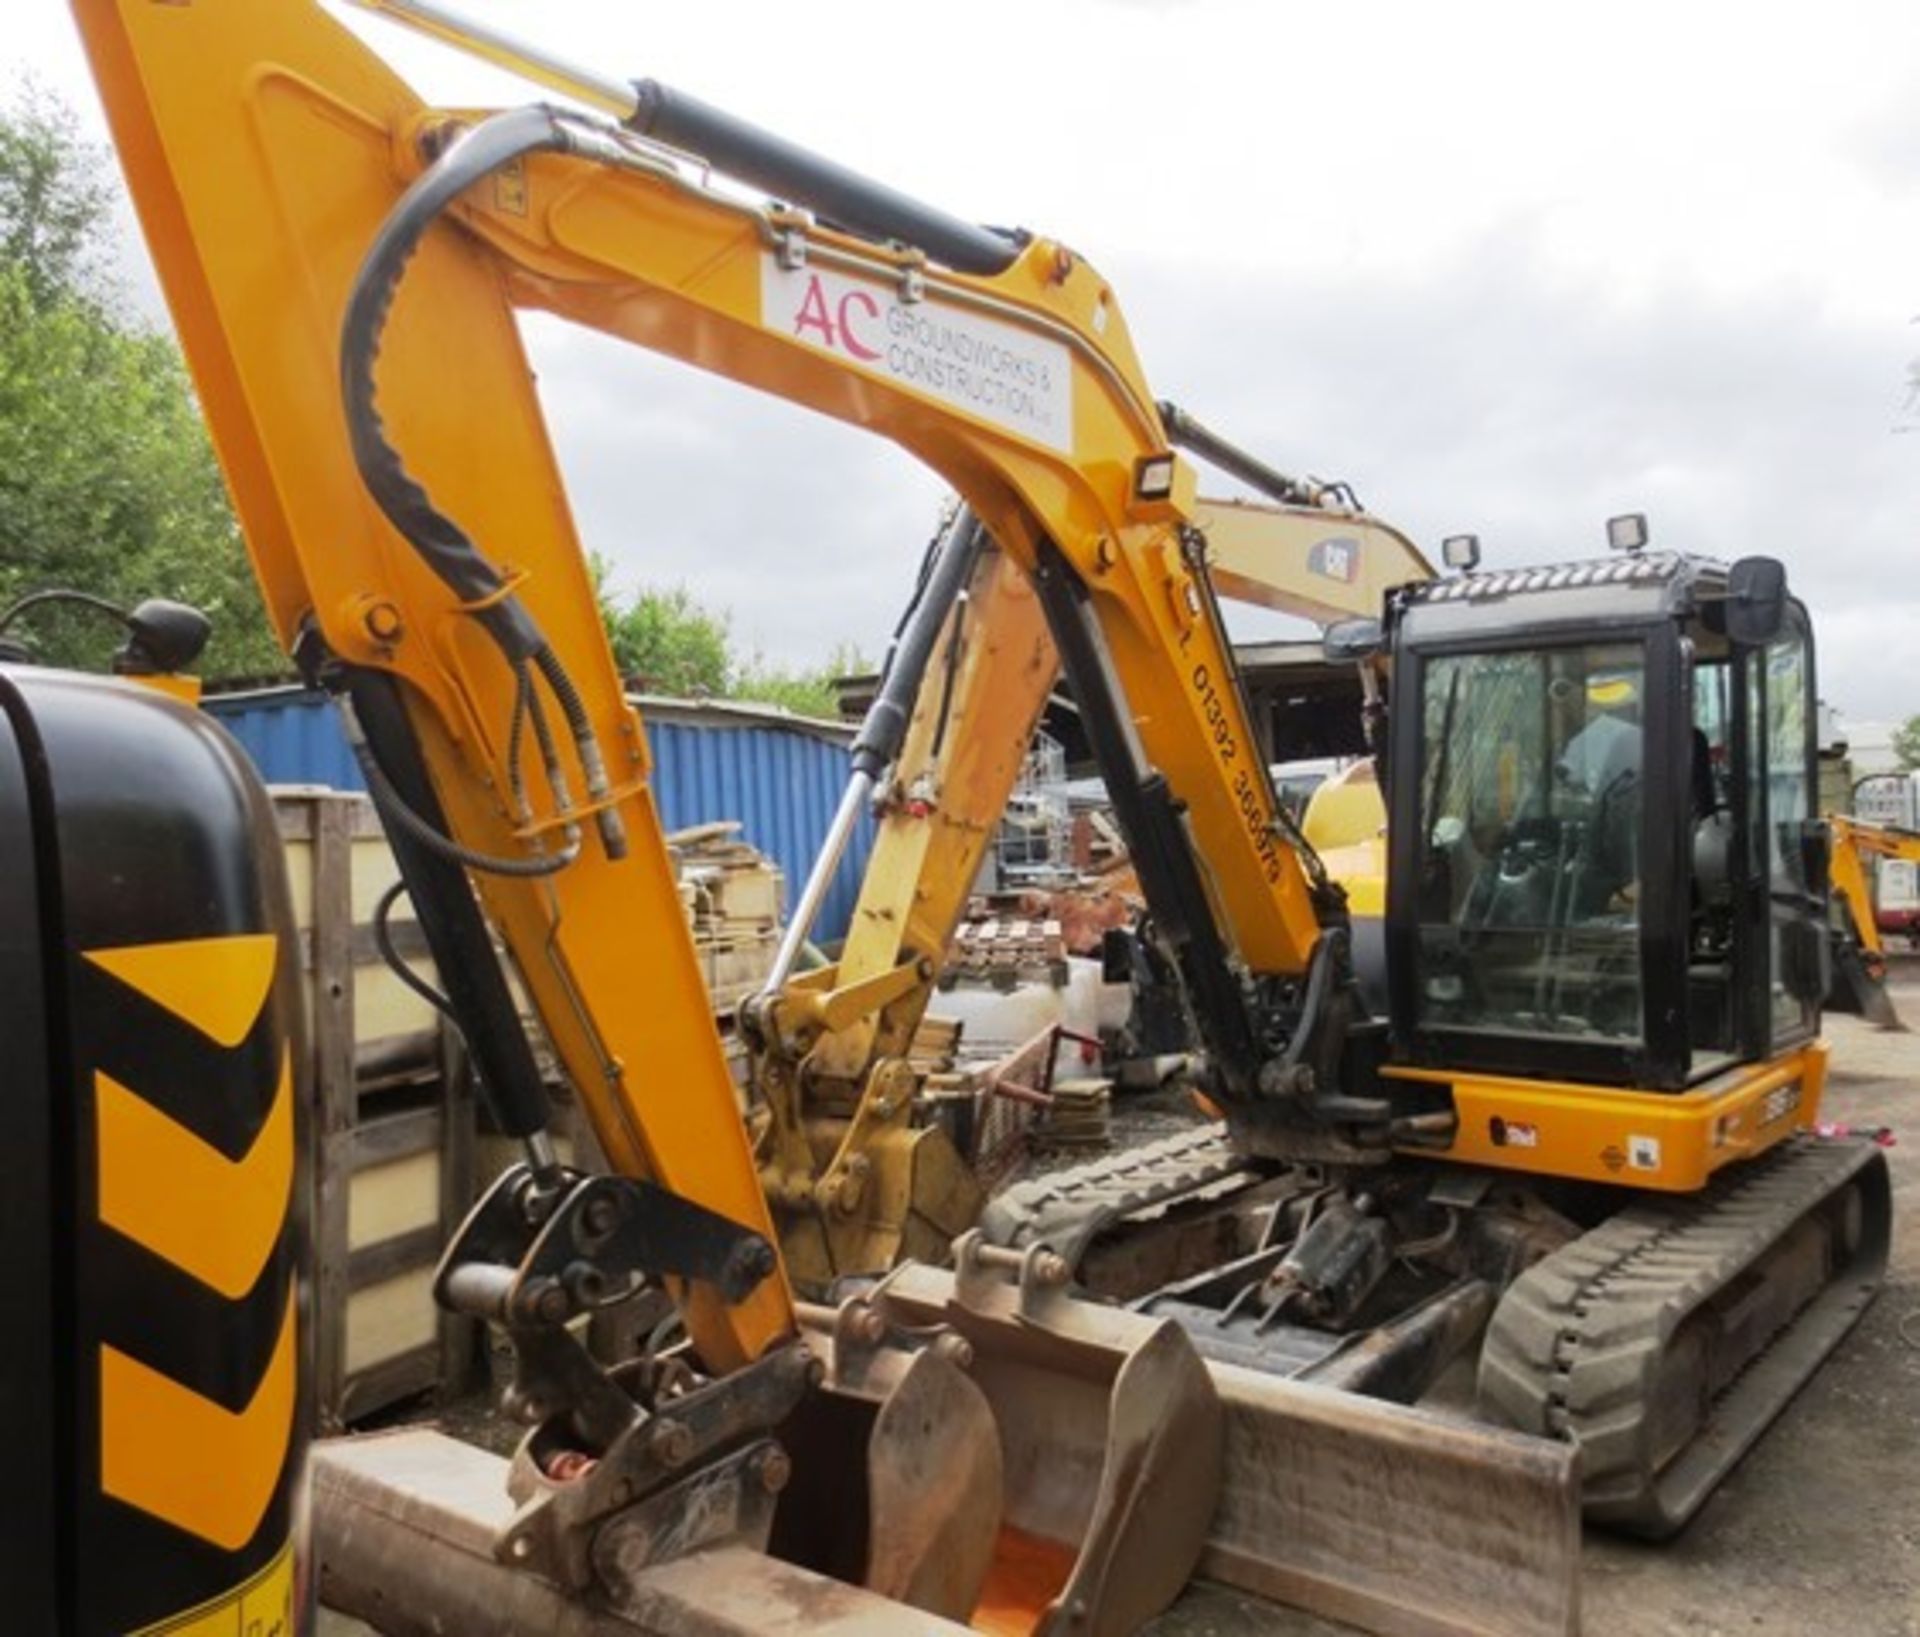 JCB 86C-1 rubber tracked midi hydraulic excavator with front dozer, product ID No: JCB086C1A02249723 - Image 5 of 19